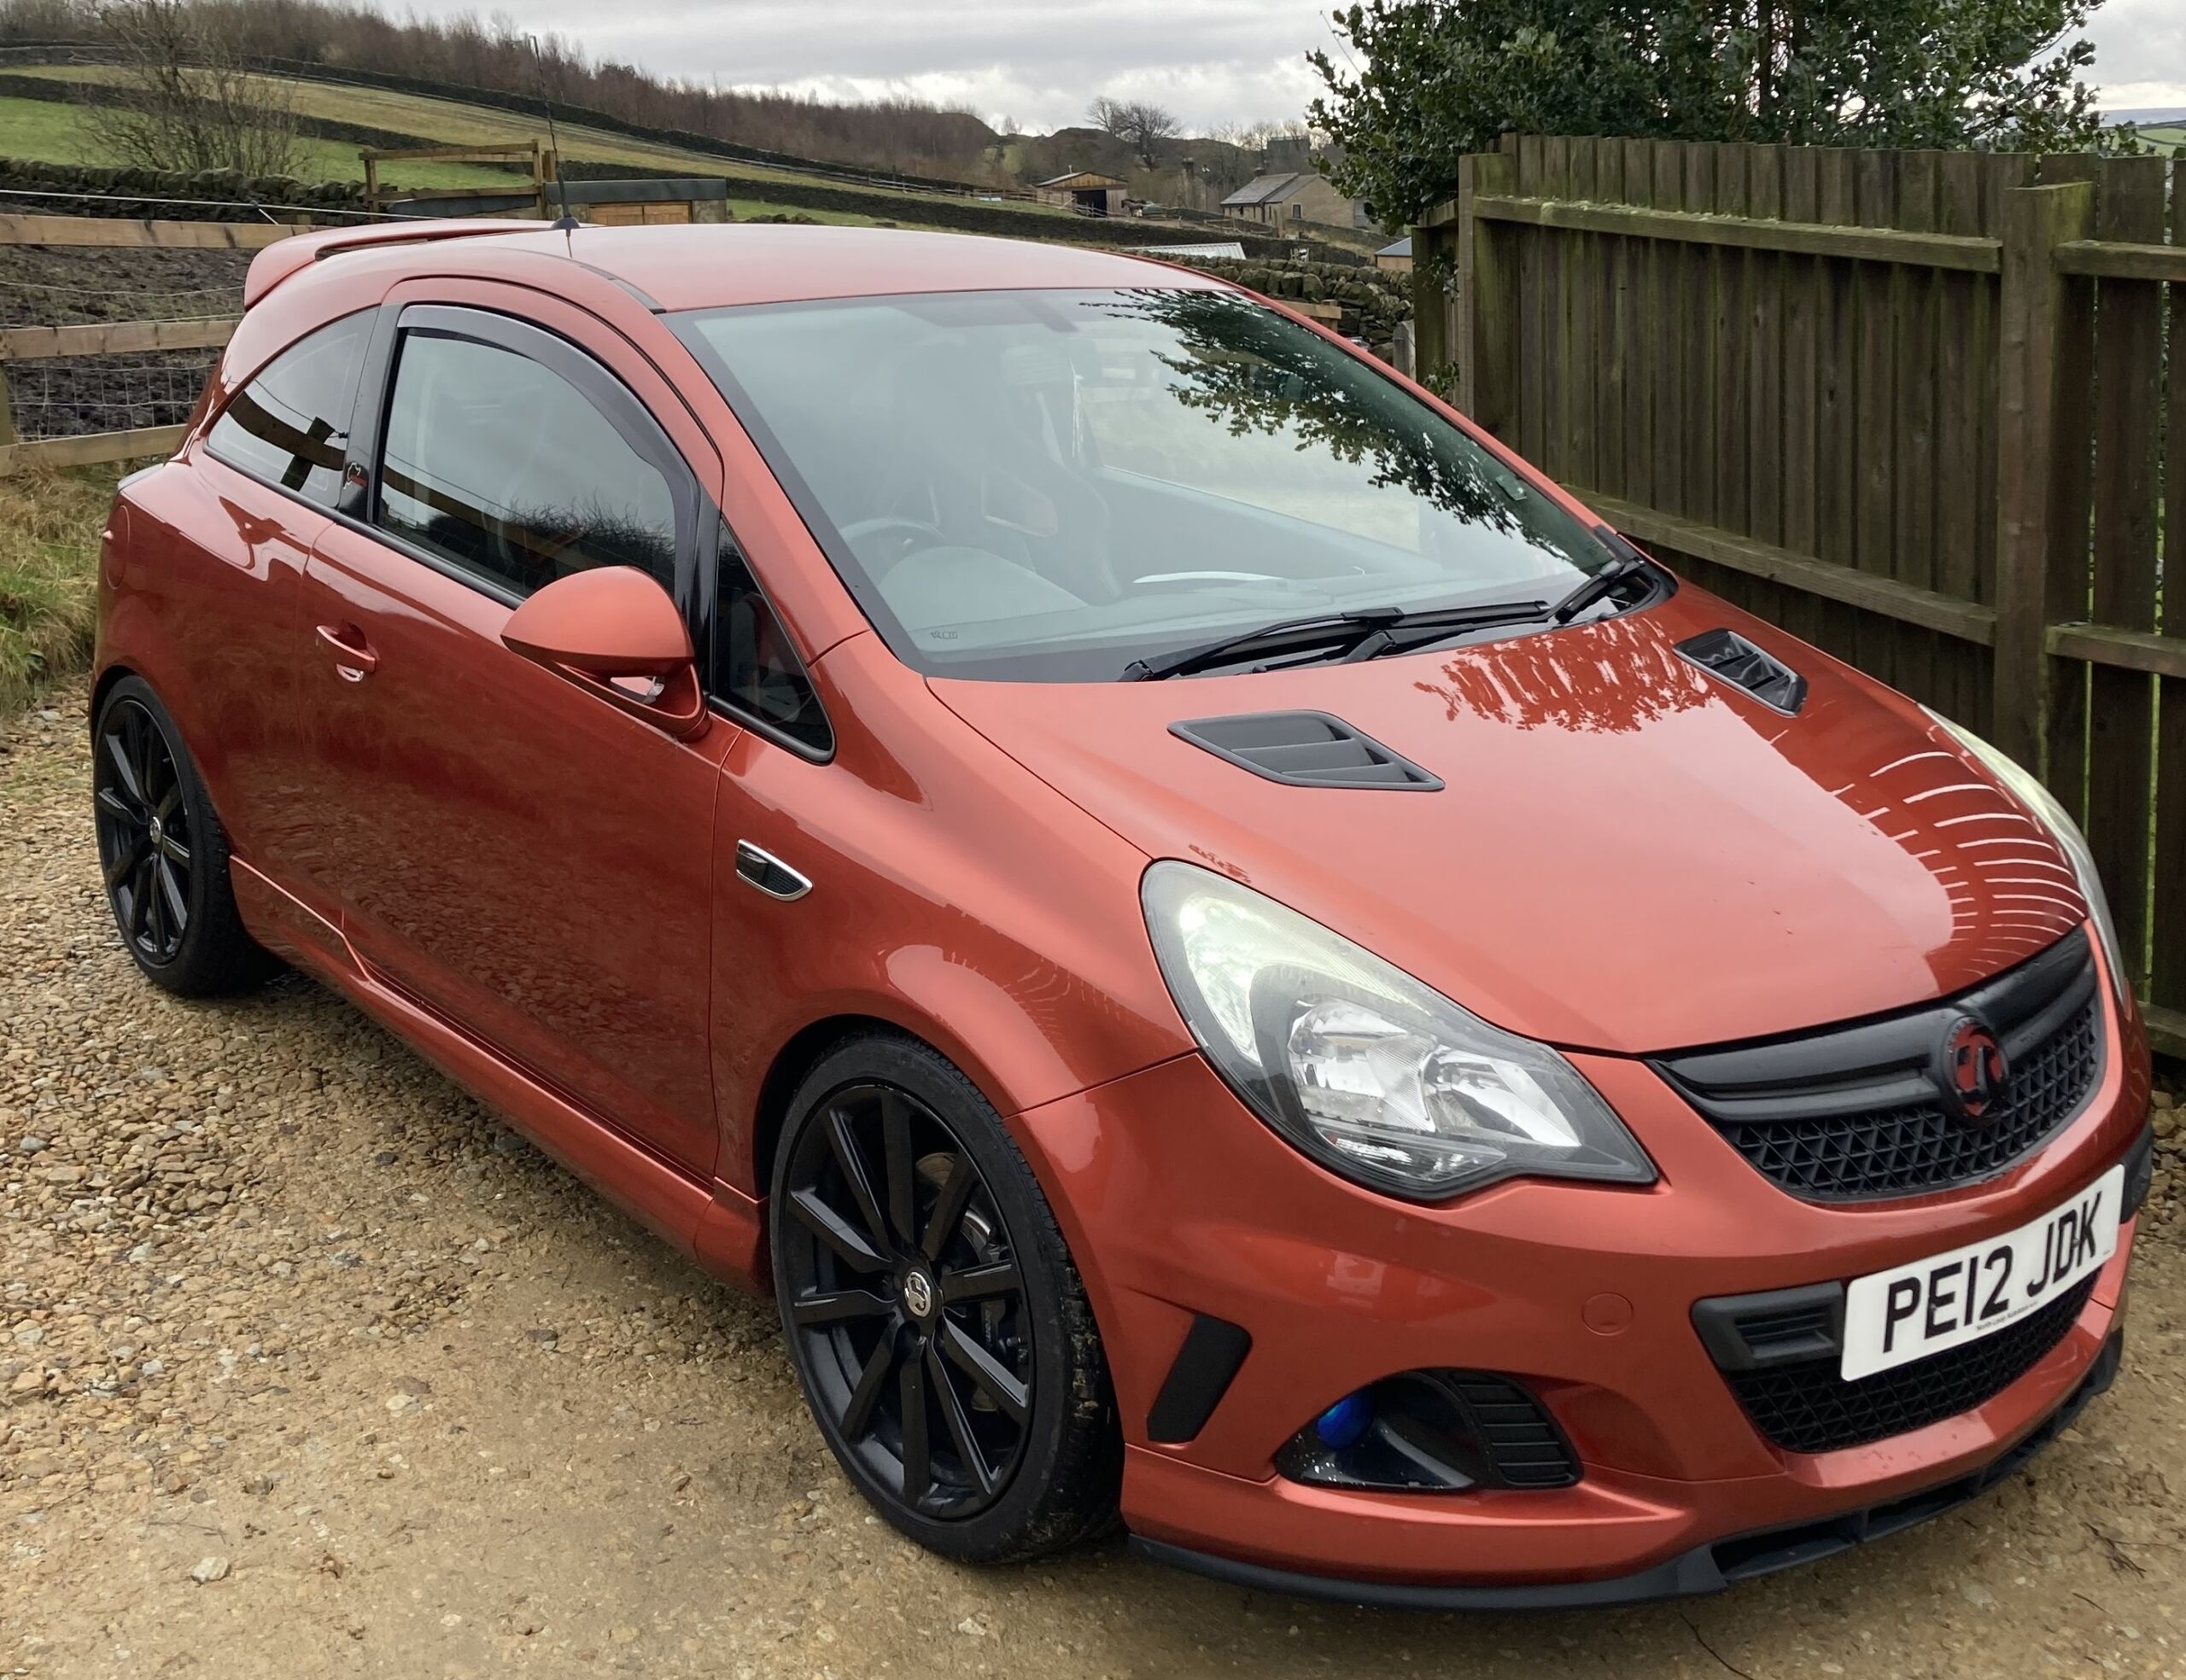 For Sale VAUXHALL CORSA VXR NURBURGRING EDITION in West Yorkshire